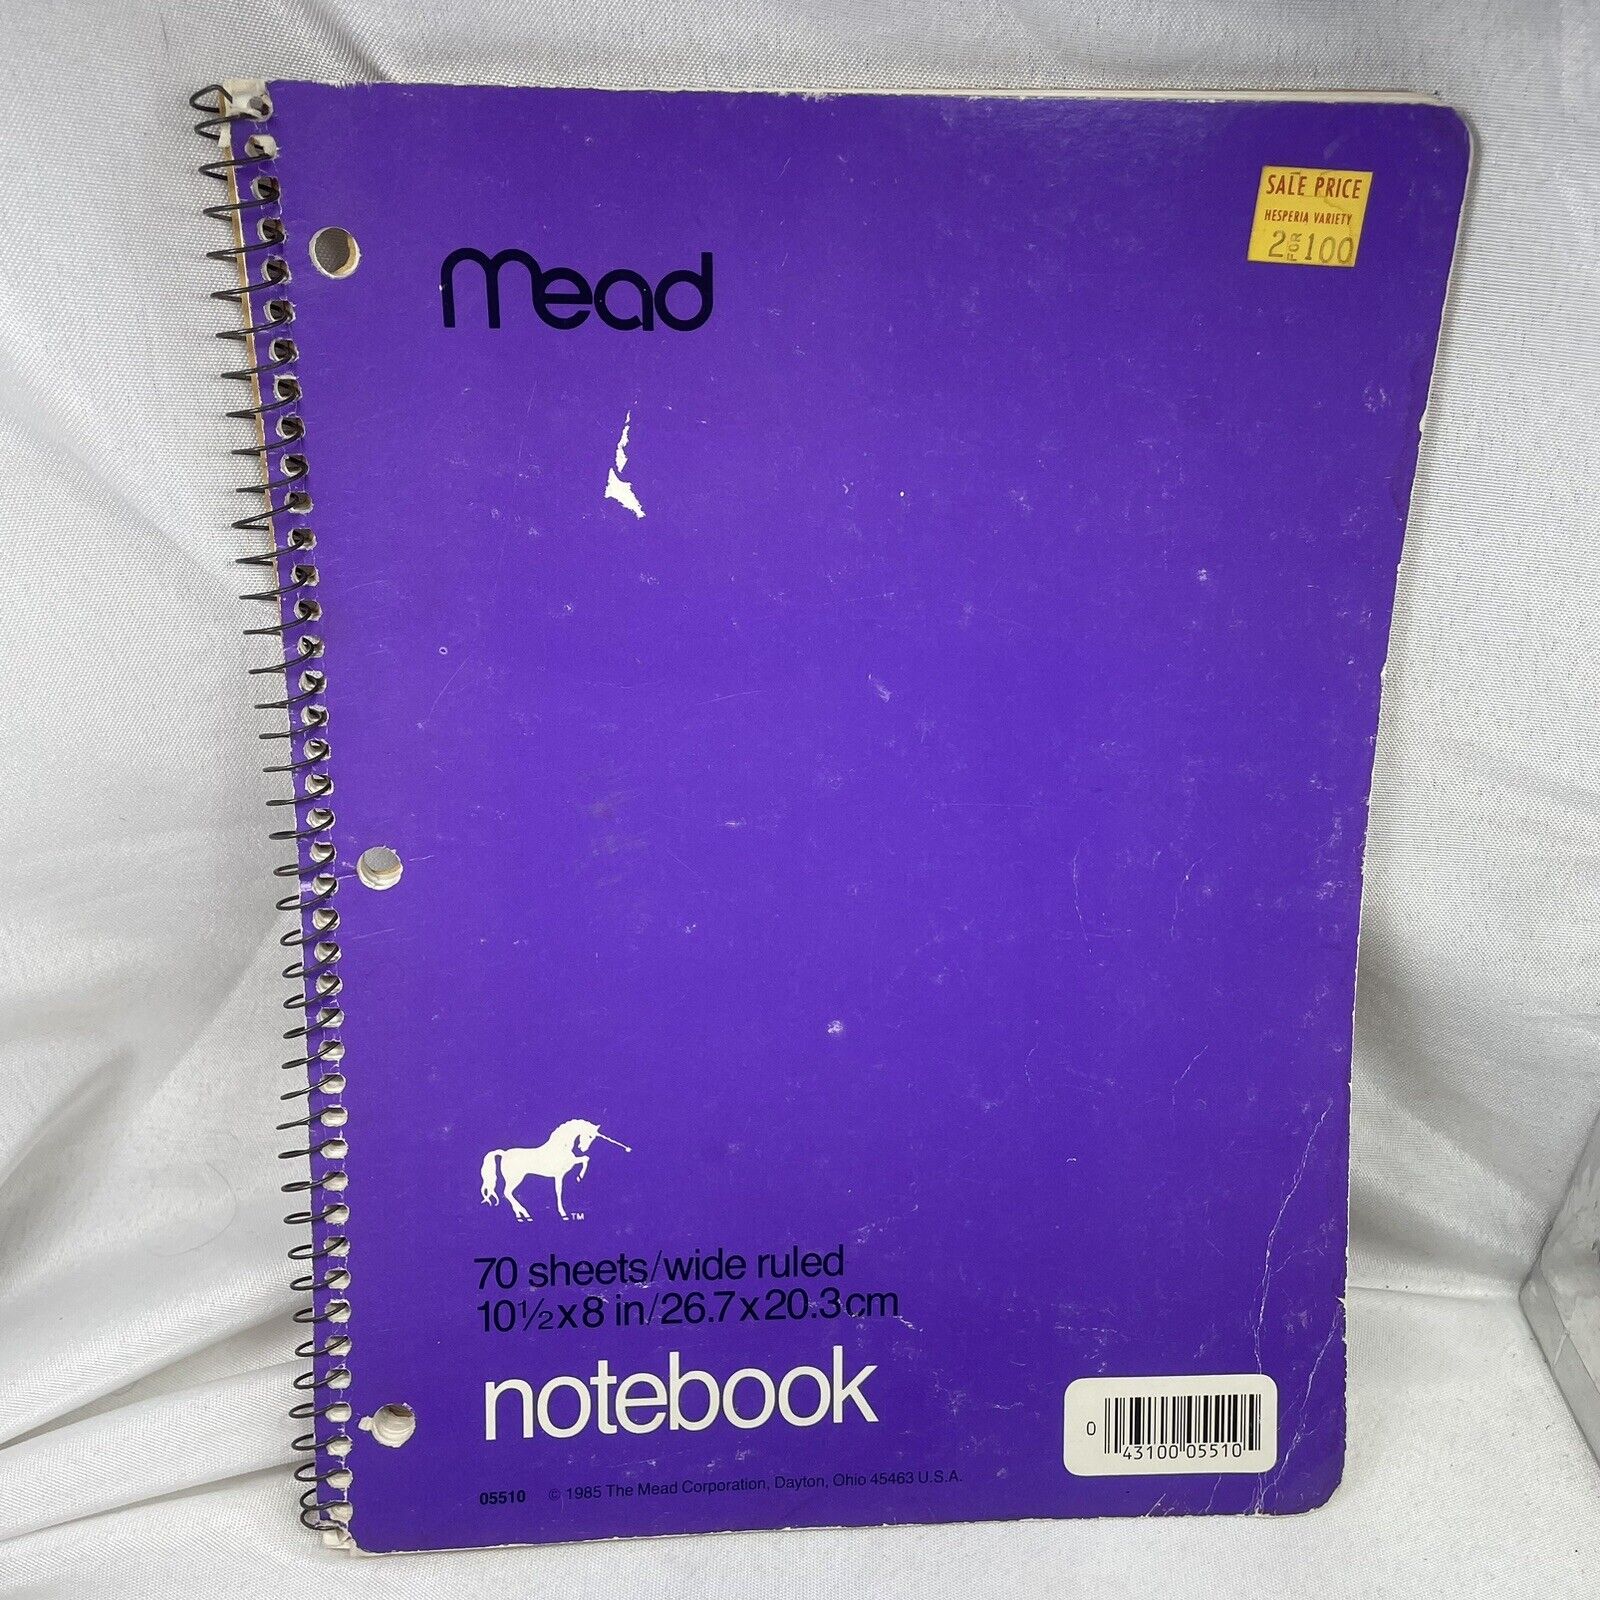 Mead Purple Unicorn Vintage 1985 Spiral Notebook - 30 Sheets Wide Ruled